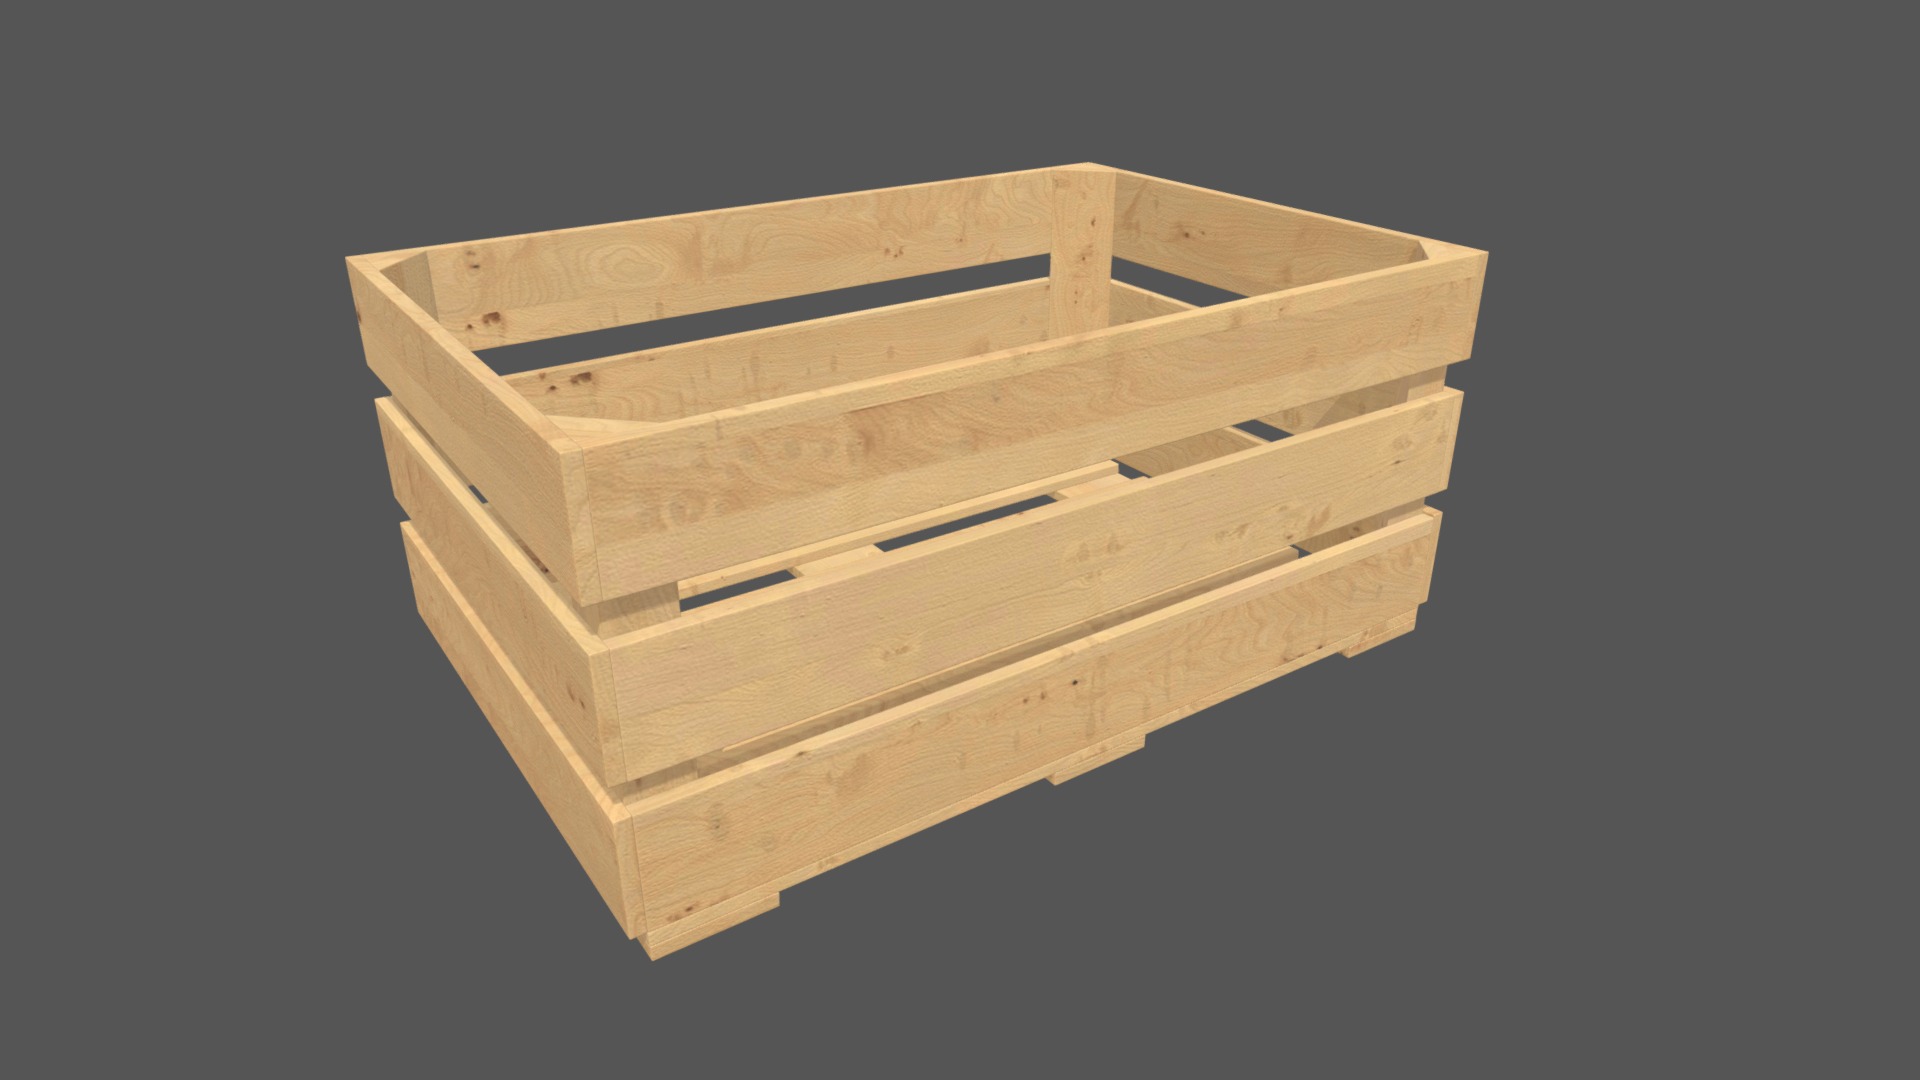 3D model wooden box with nails - This is a 3D model of the wooden box with nails. The 3D model is about a wooden box with a hole in the middle.